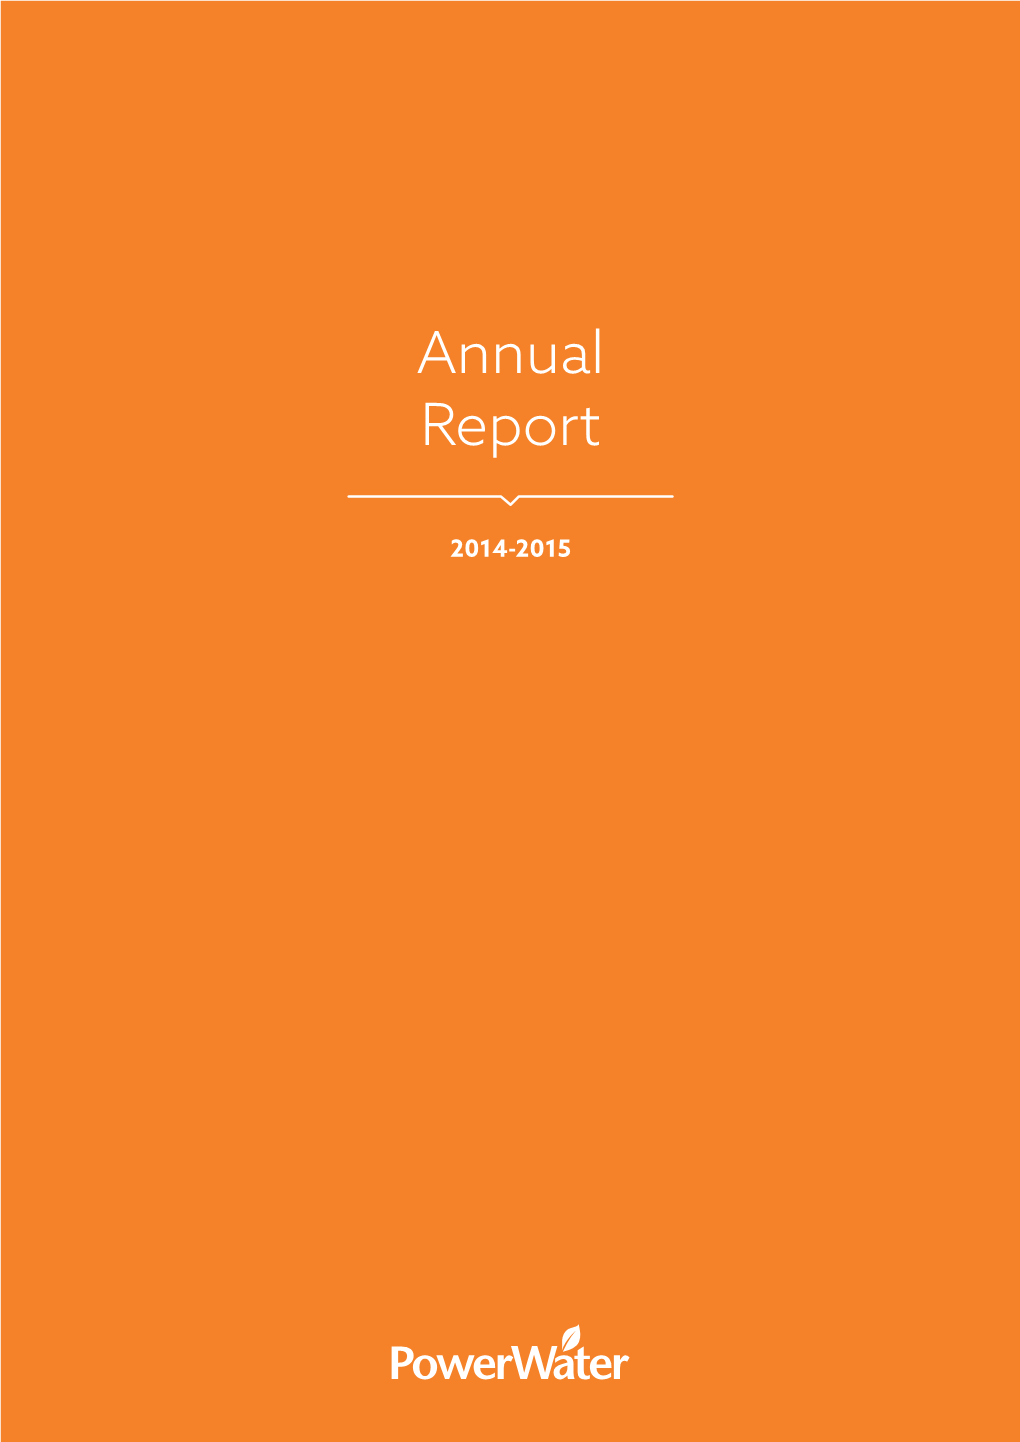 Power and Water Annual Report 2015